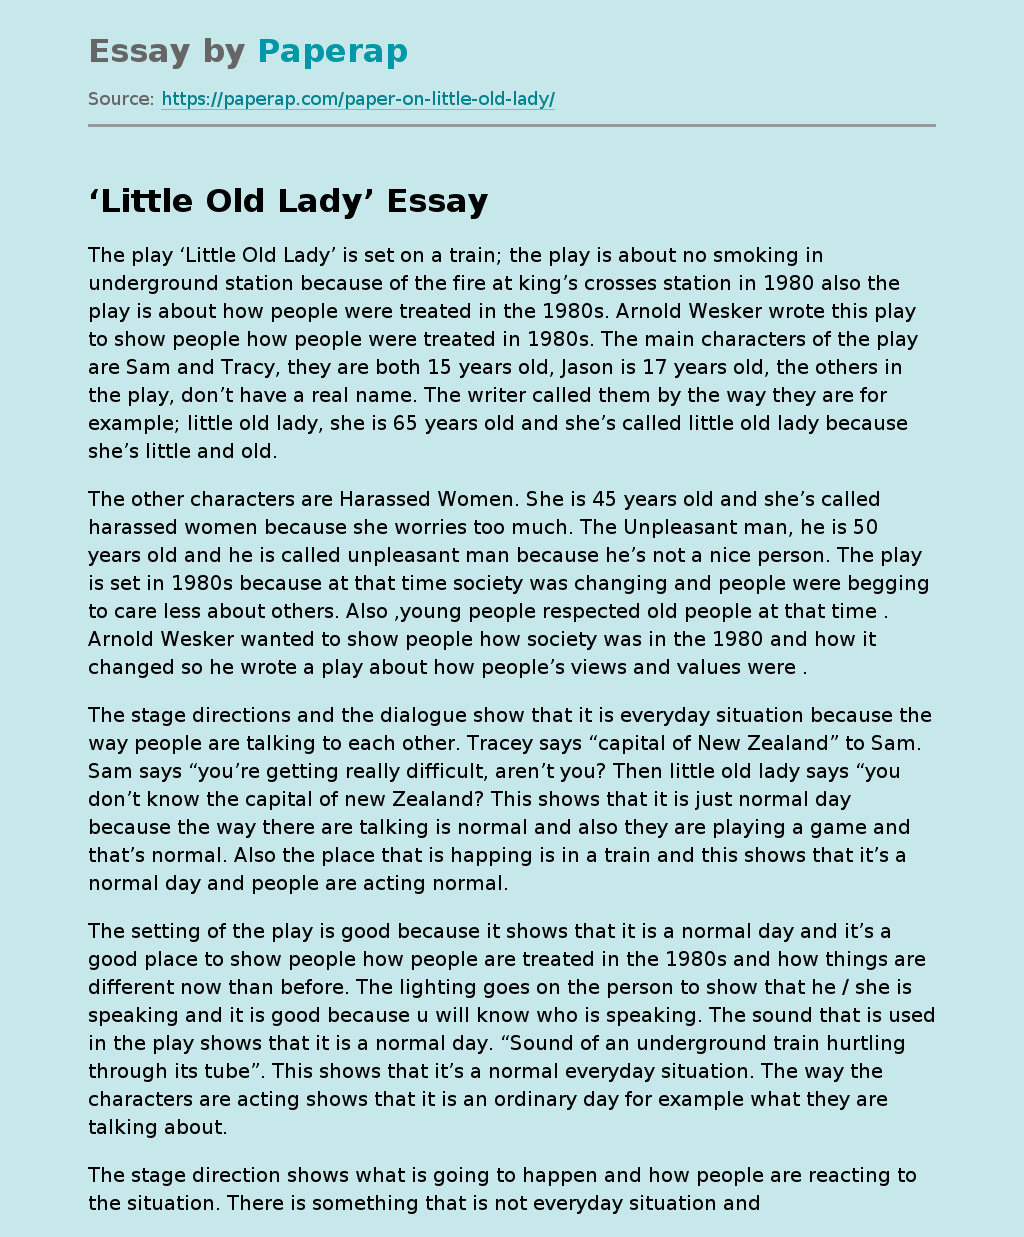 The Play ‘Little Old Lady’